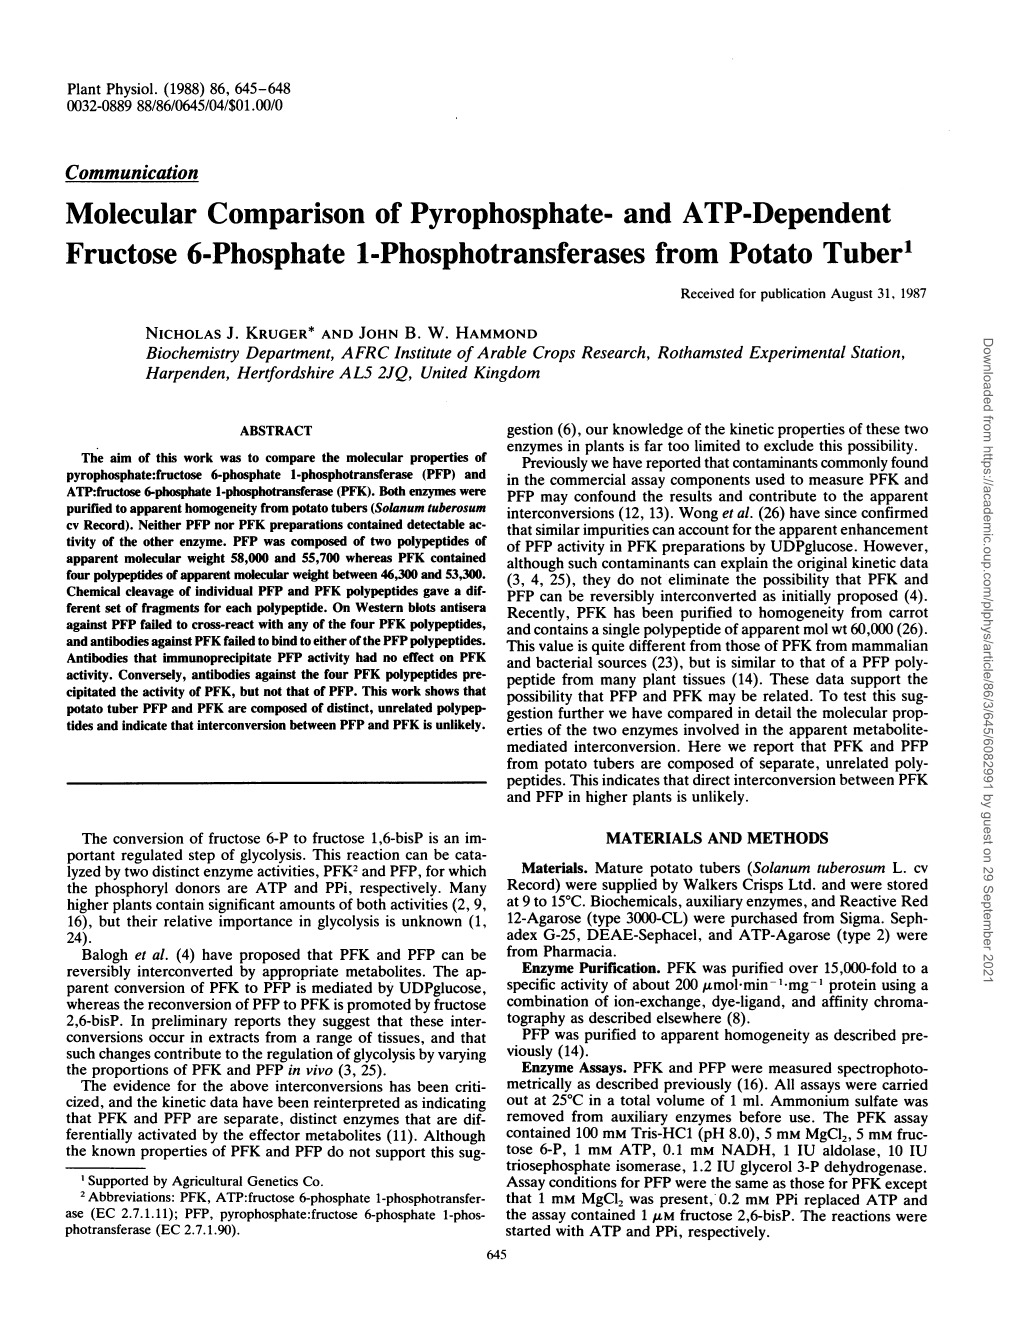 Fructose 6-Phosphate 1-Phosphotransferases from Potato Tuber' Received for Publication August 31, 1987